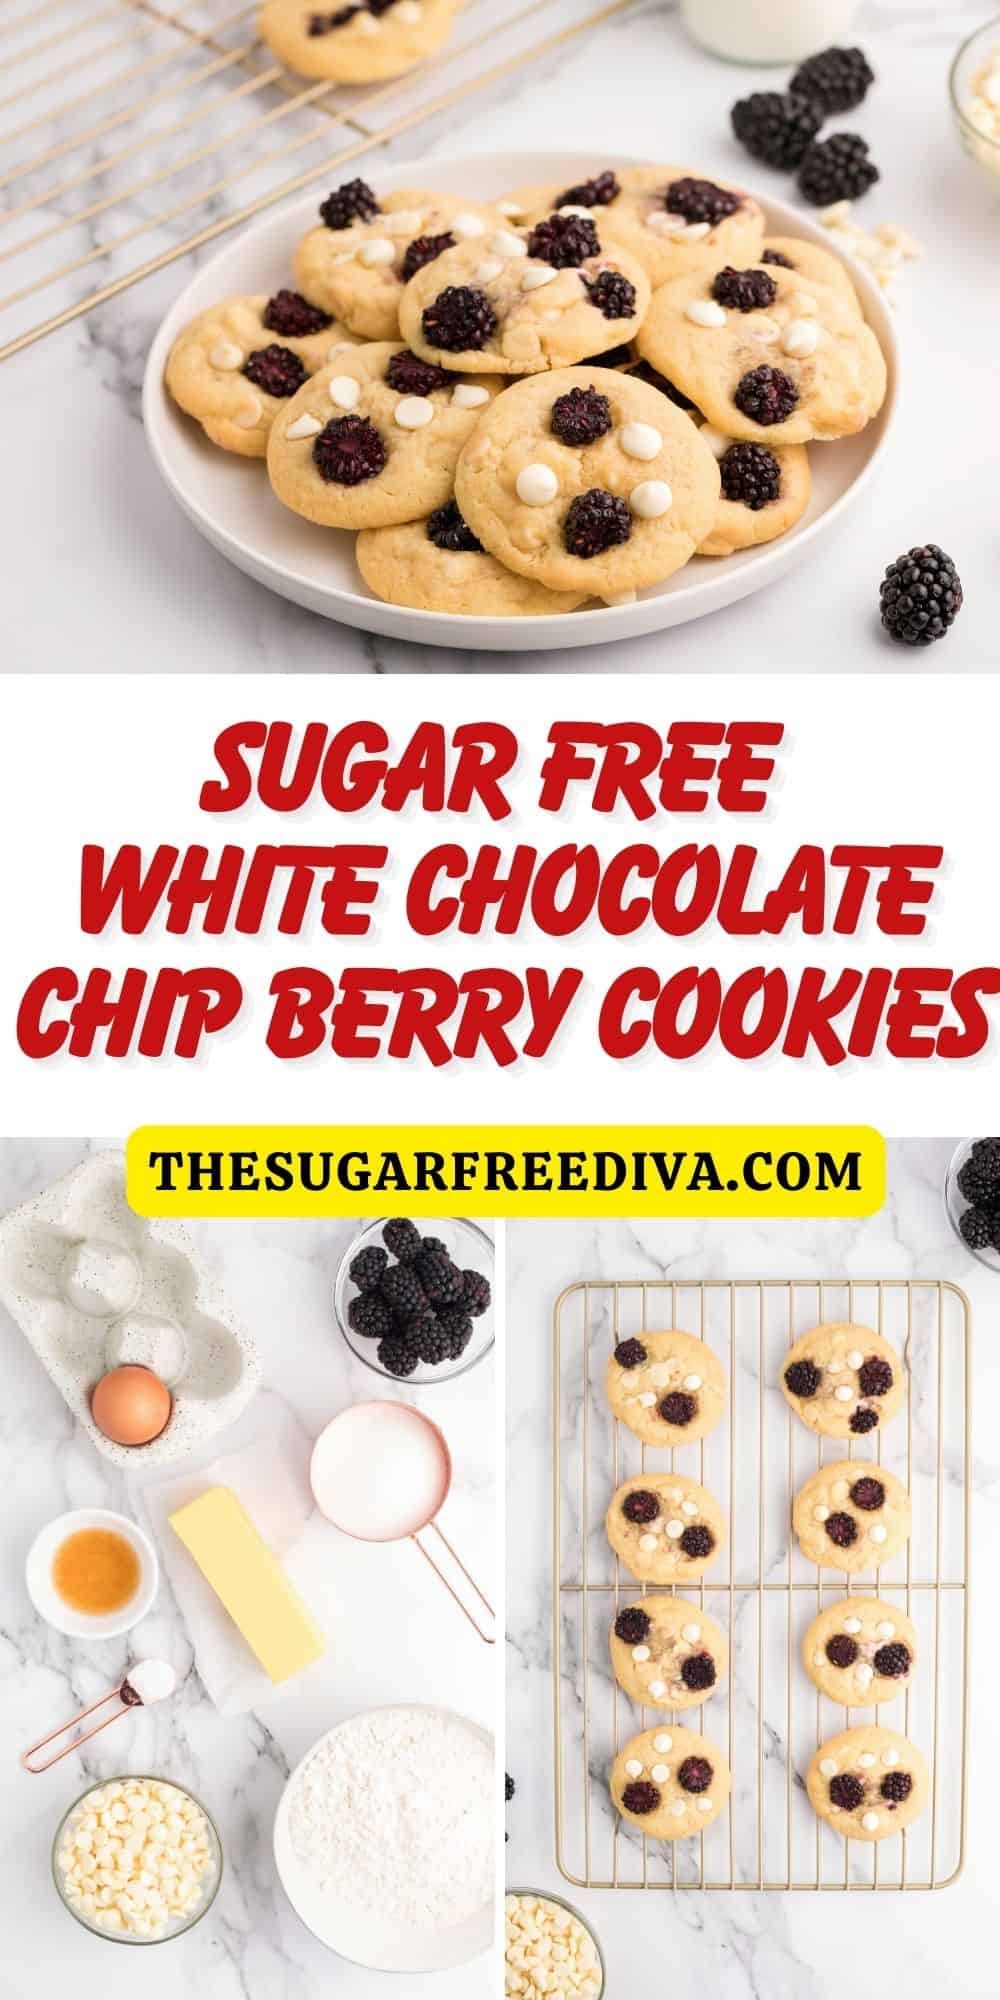 Sugar Free White Chocolate Chip Berry Cookies, a delicious buttery cookie topped with sugar free white chocolate chips and blackberries.